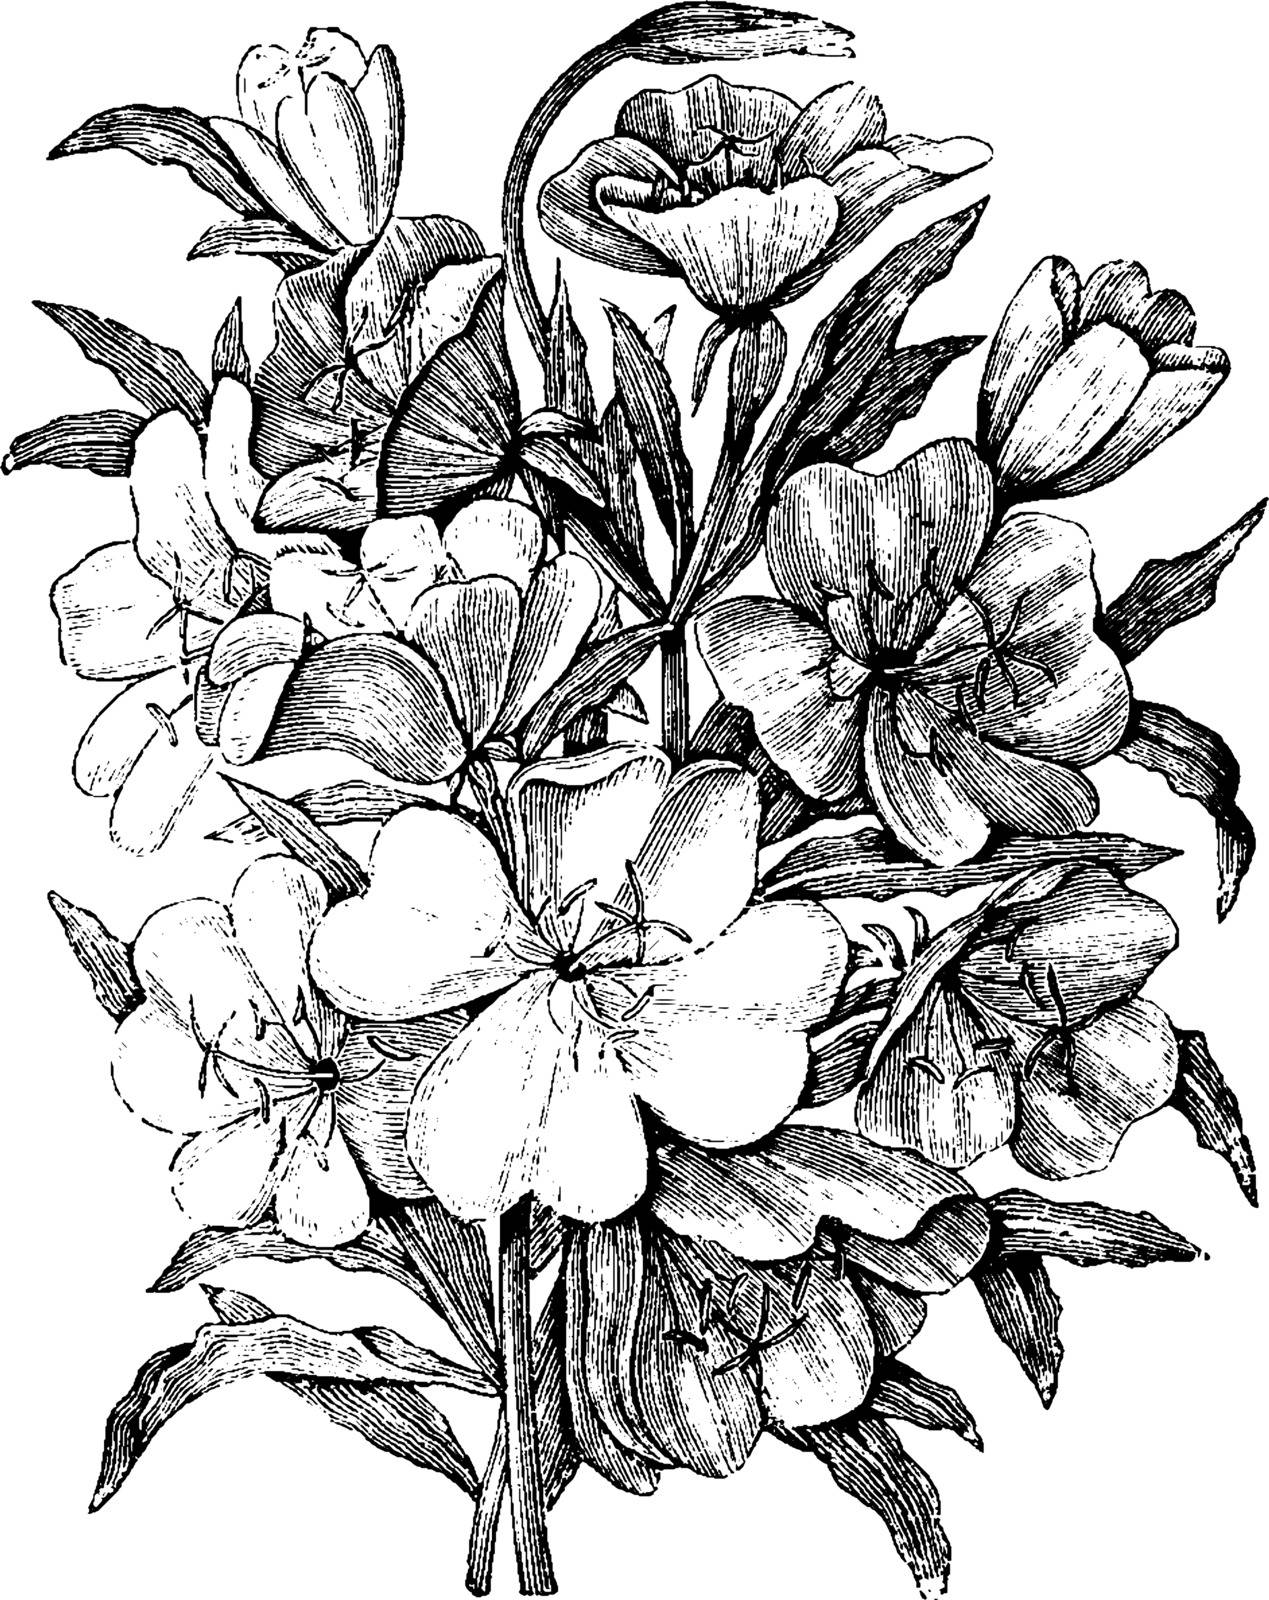 Oenothera californica is a perennial herb producing a spreading or upright stem up to 80 centimeters long. Young plants have a basal rosette of leaves it is white to pale pink in color, vintage line drawing or engraving illustration.